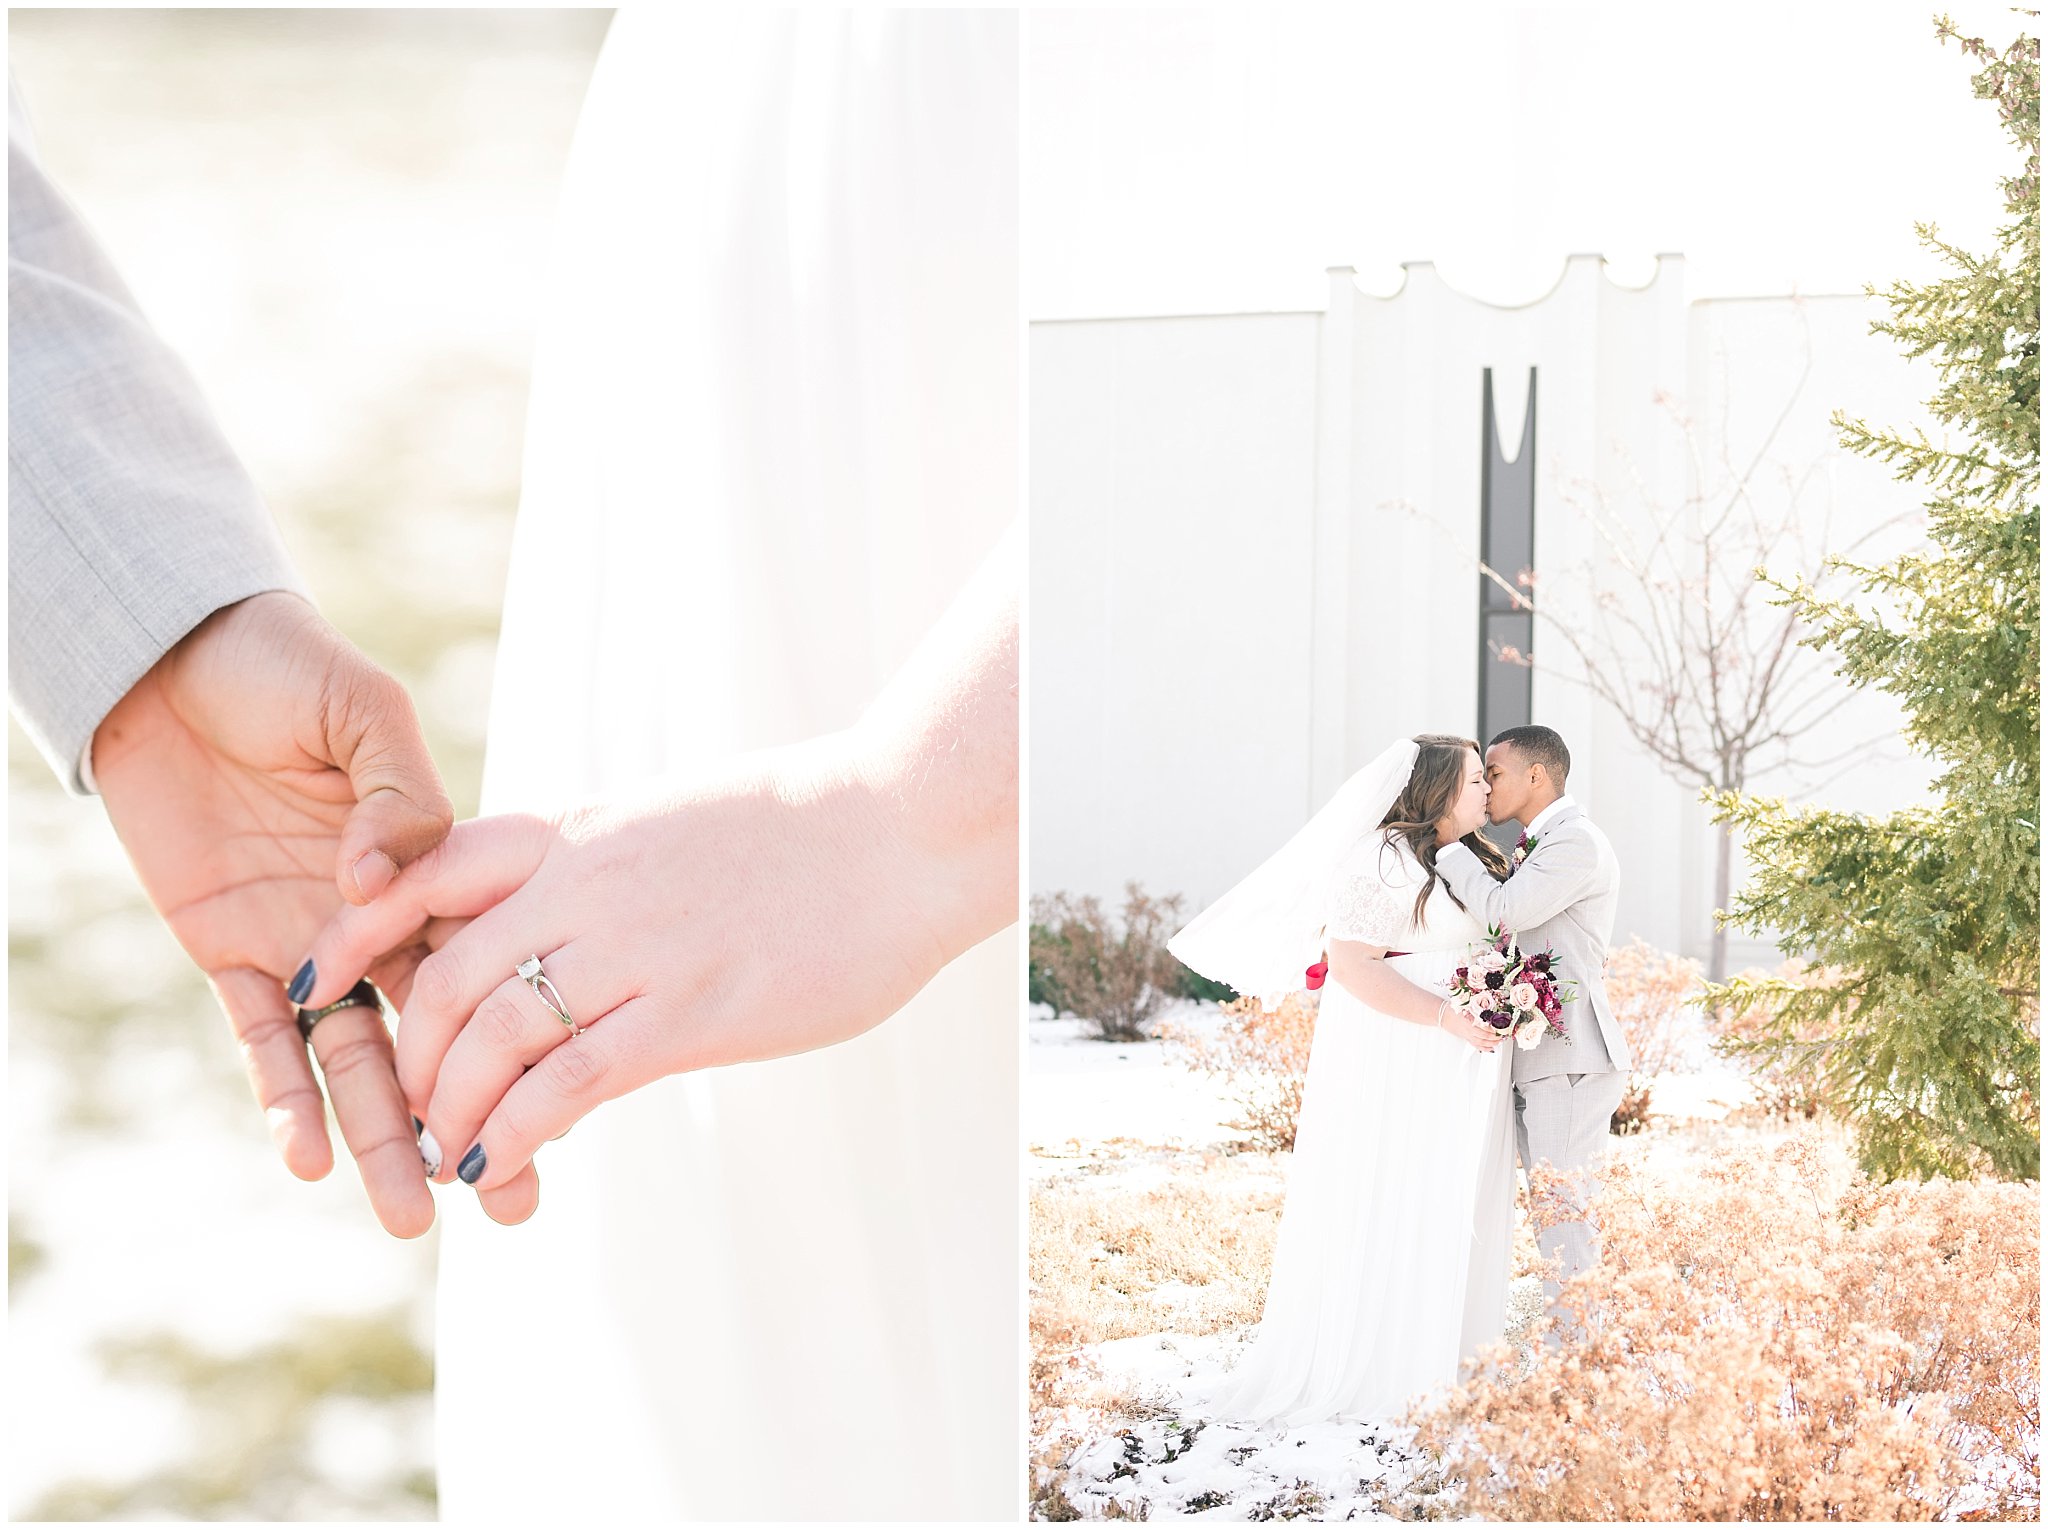 Bride and groom portraits with bride in a dress from Latterdaybride and groom in light grey suit | burgundy and quicksand rose bouquet by Dancing Daisies Floral | Jordan River Temple Winter Wedding | Jessie and Dallin Photography